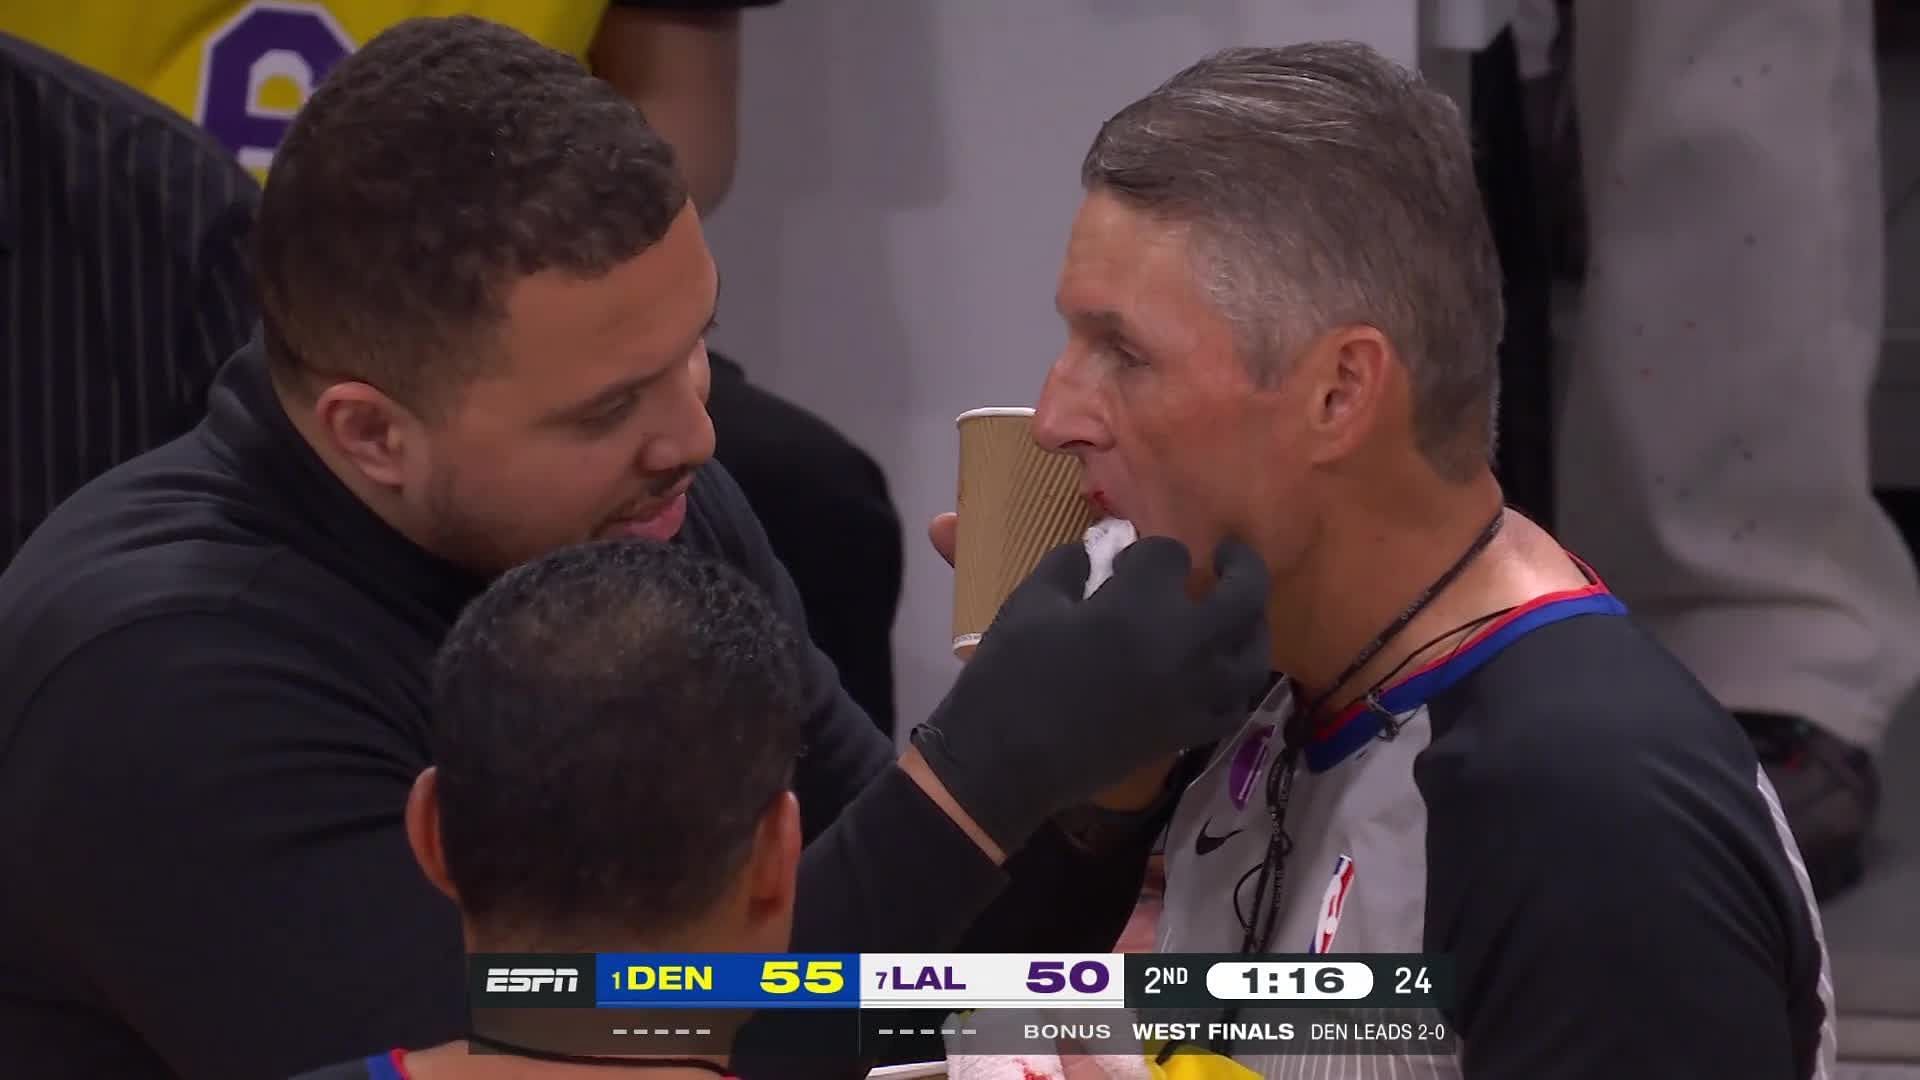 Scott Foster bloodies lip after collision with LeBron James